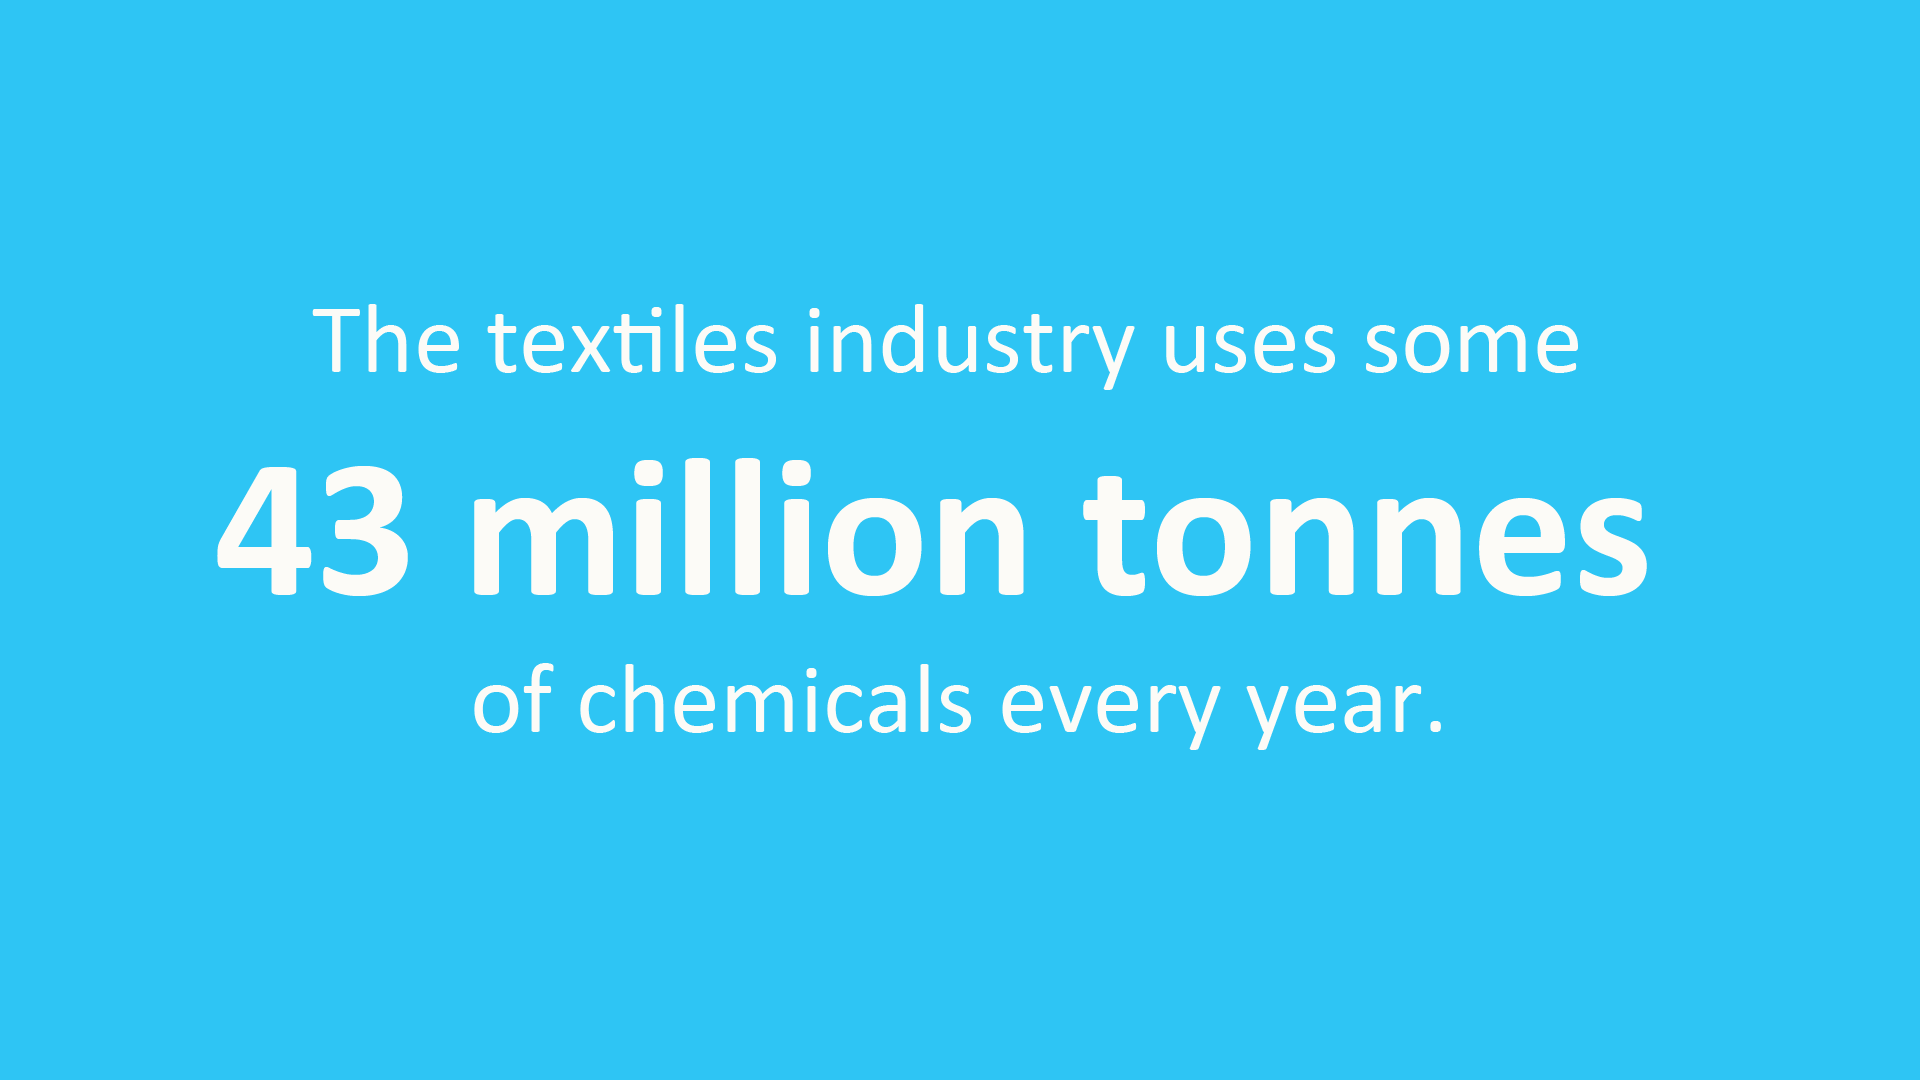 The textiles industry uses some 43 million tonnes of chemicals every year.